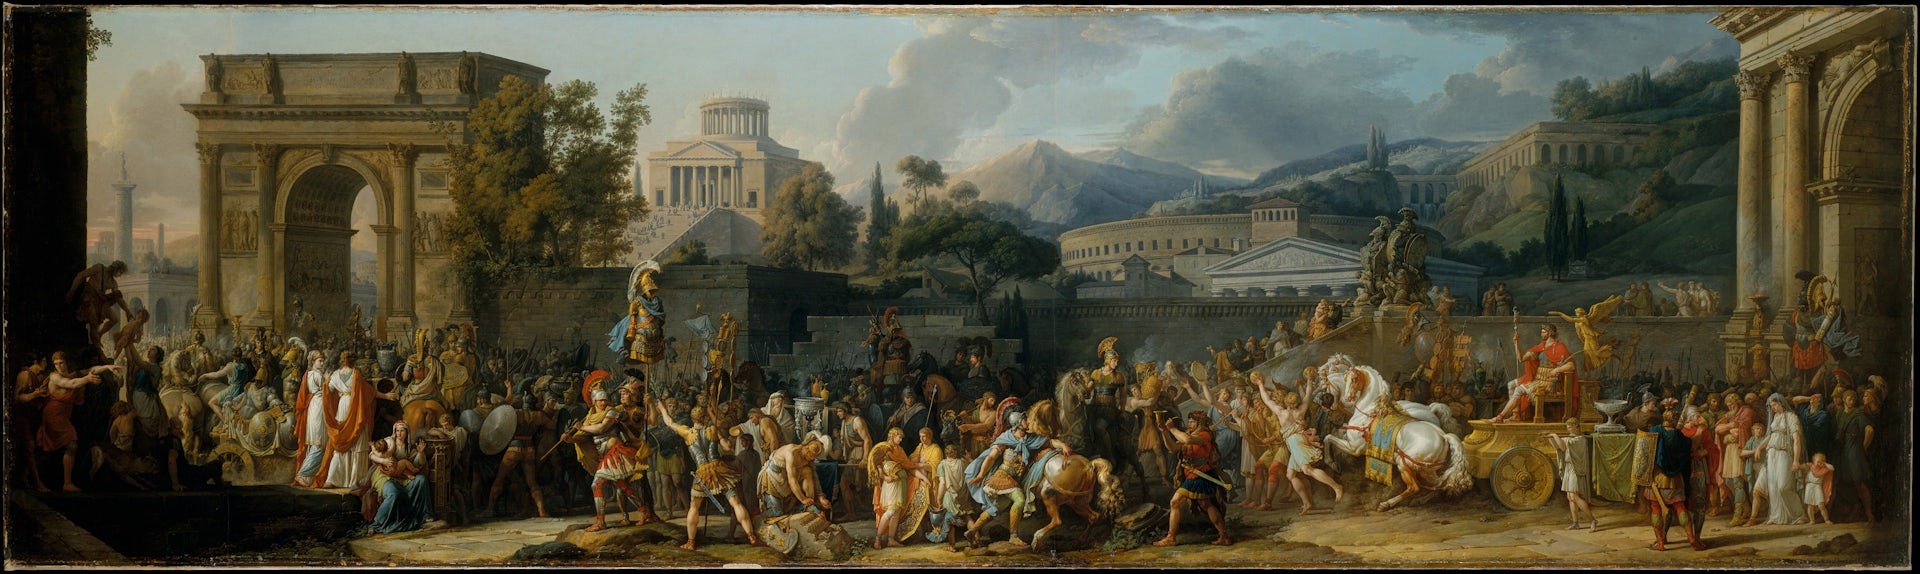 The Triumph of Aemilius Paulus over King Perseus of Macedon Painting by Carle Vernet 1789 The Met